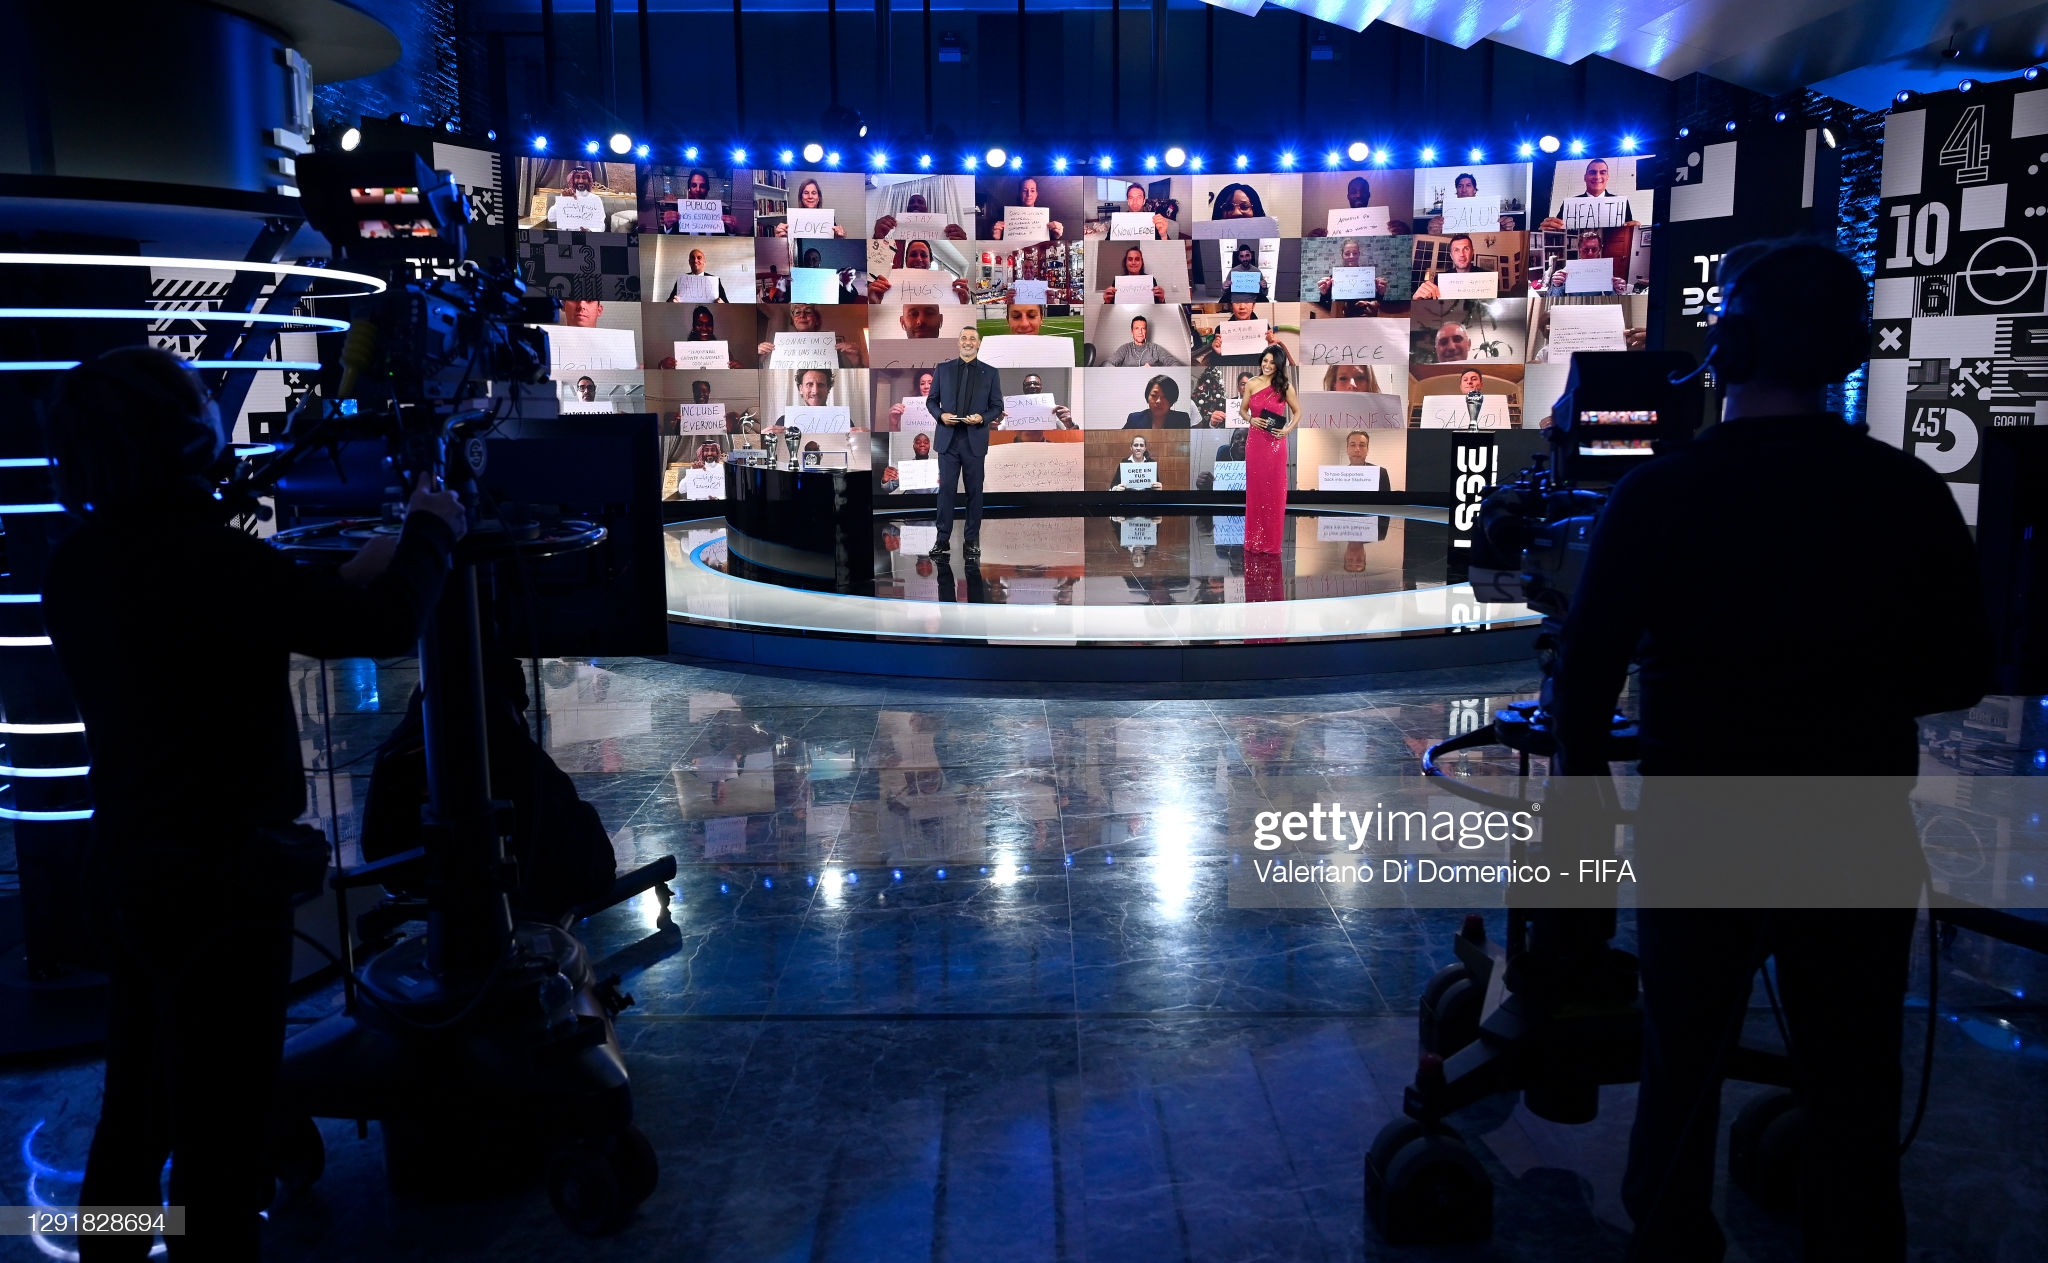 gettyimages-1291828694-2048x2048.jpg